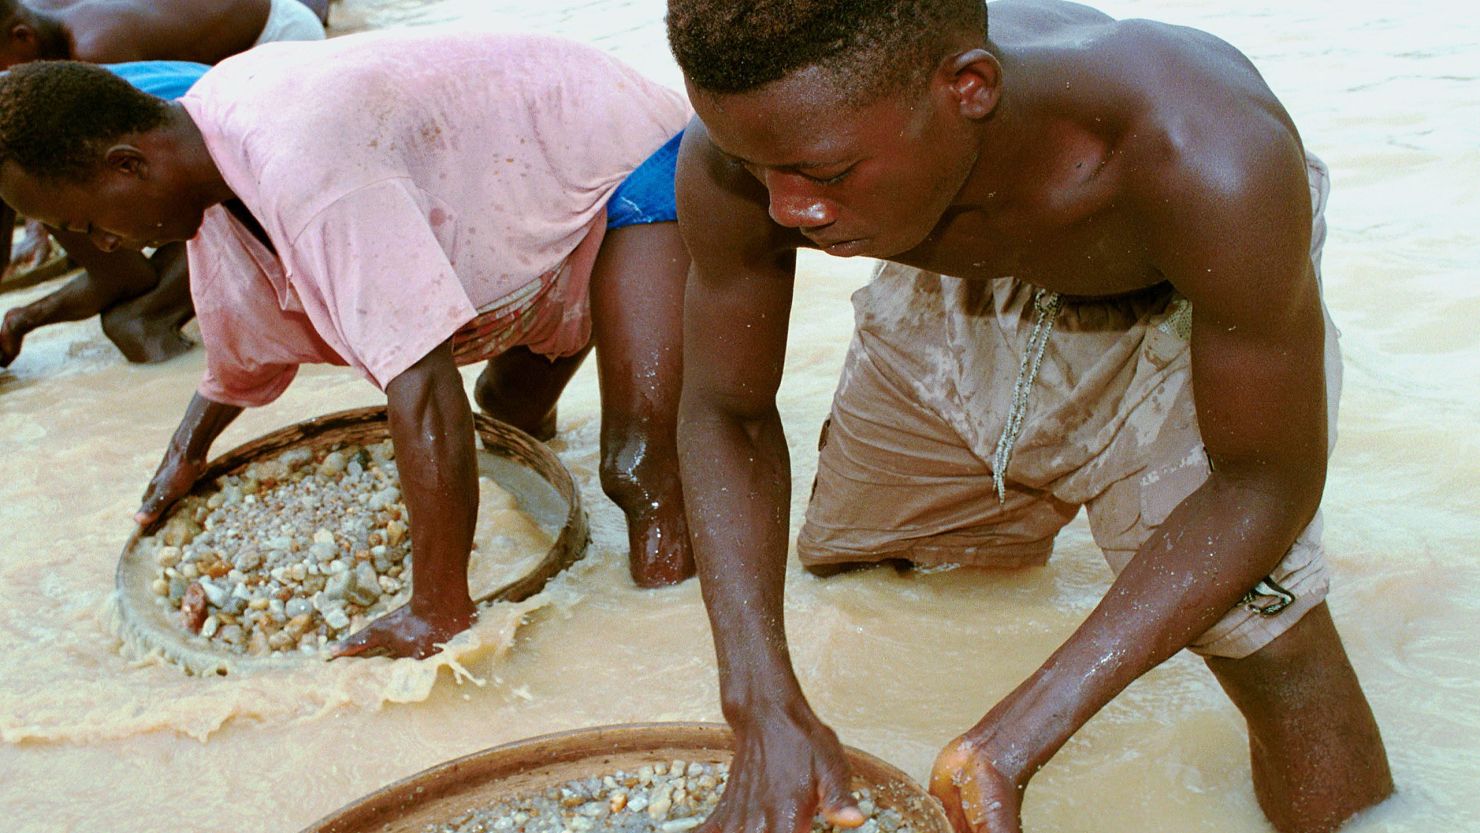 Workers pan for diamonds in a government-controlled diamond mine near Kenema, Sierra Leone, in 2001.